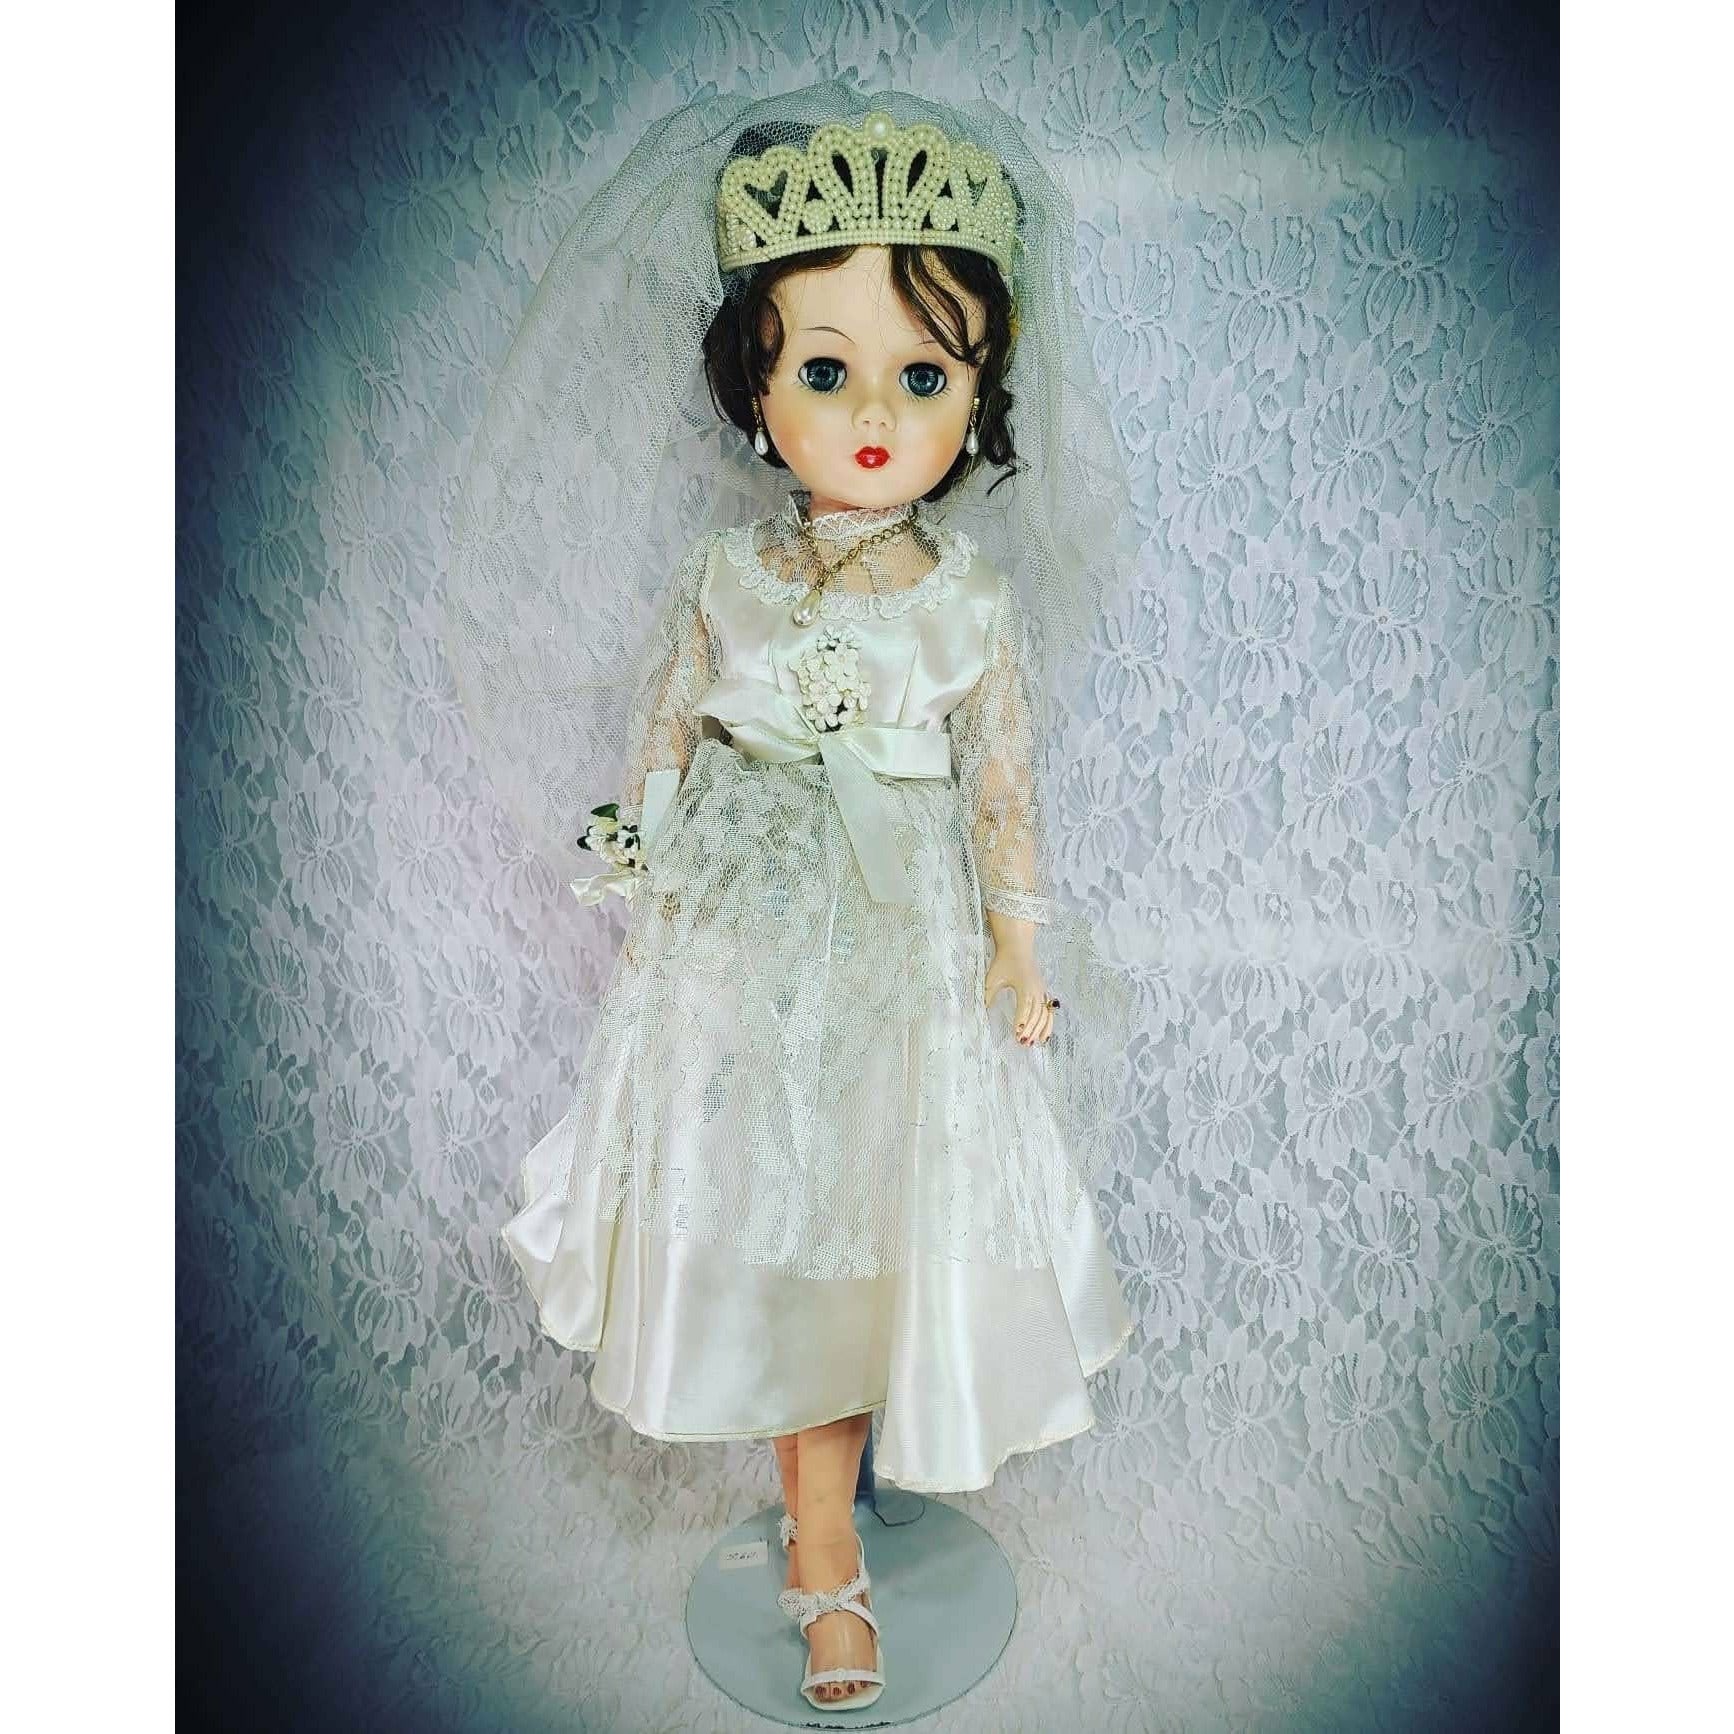 Haunted Doll ~ Cheri BIG 21" Vinyl Stuffed Grocery Store Bride Doll ~ Paranormal ~ Tormented Soul ~ Desperate for a Life